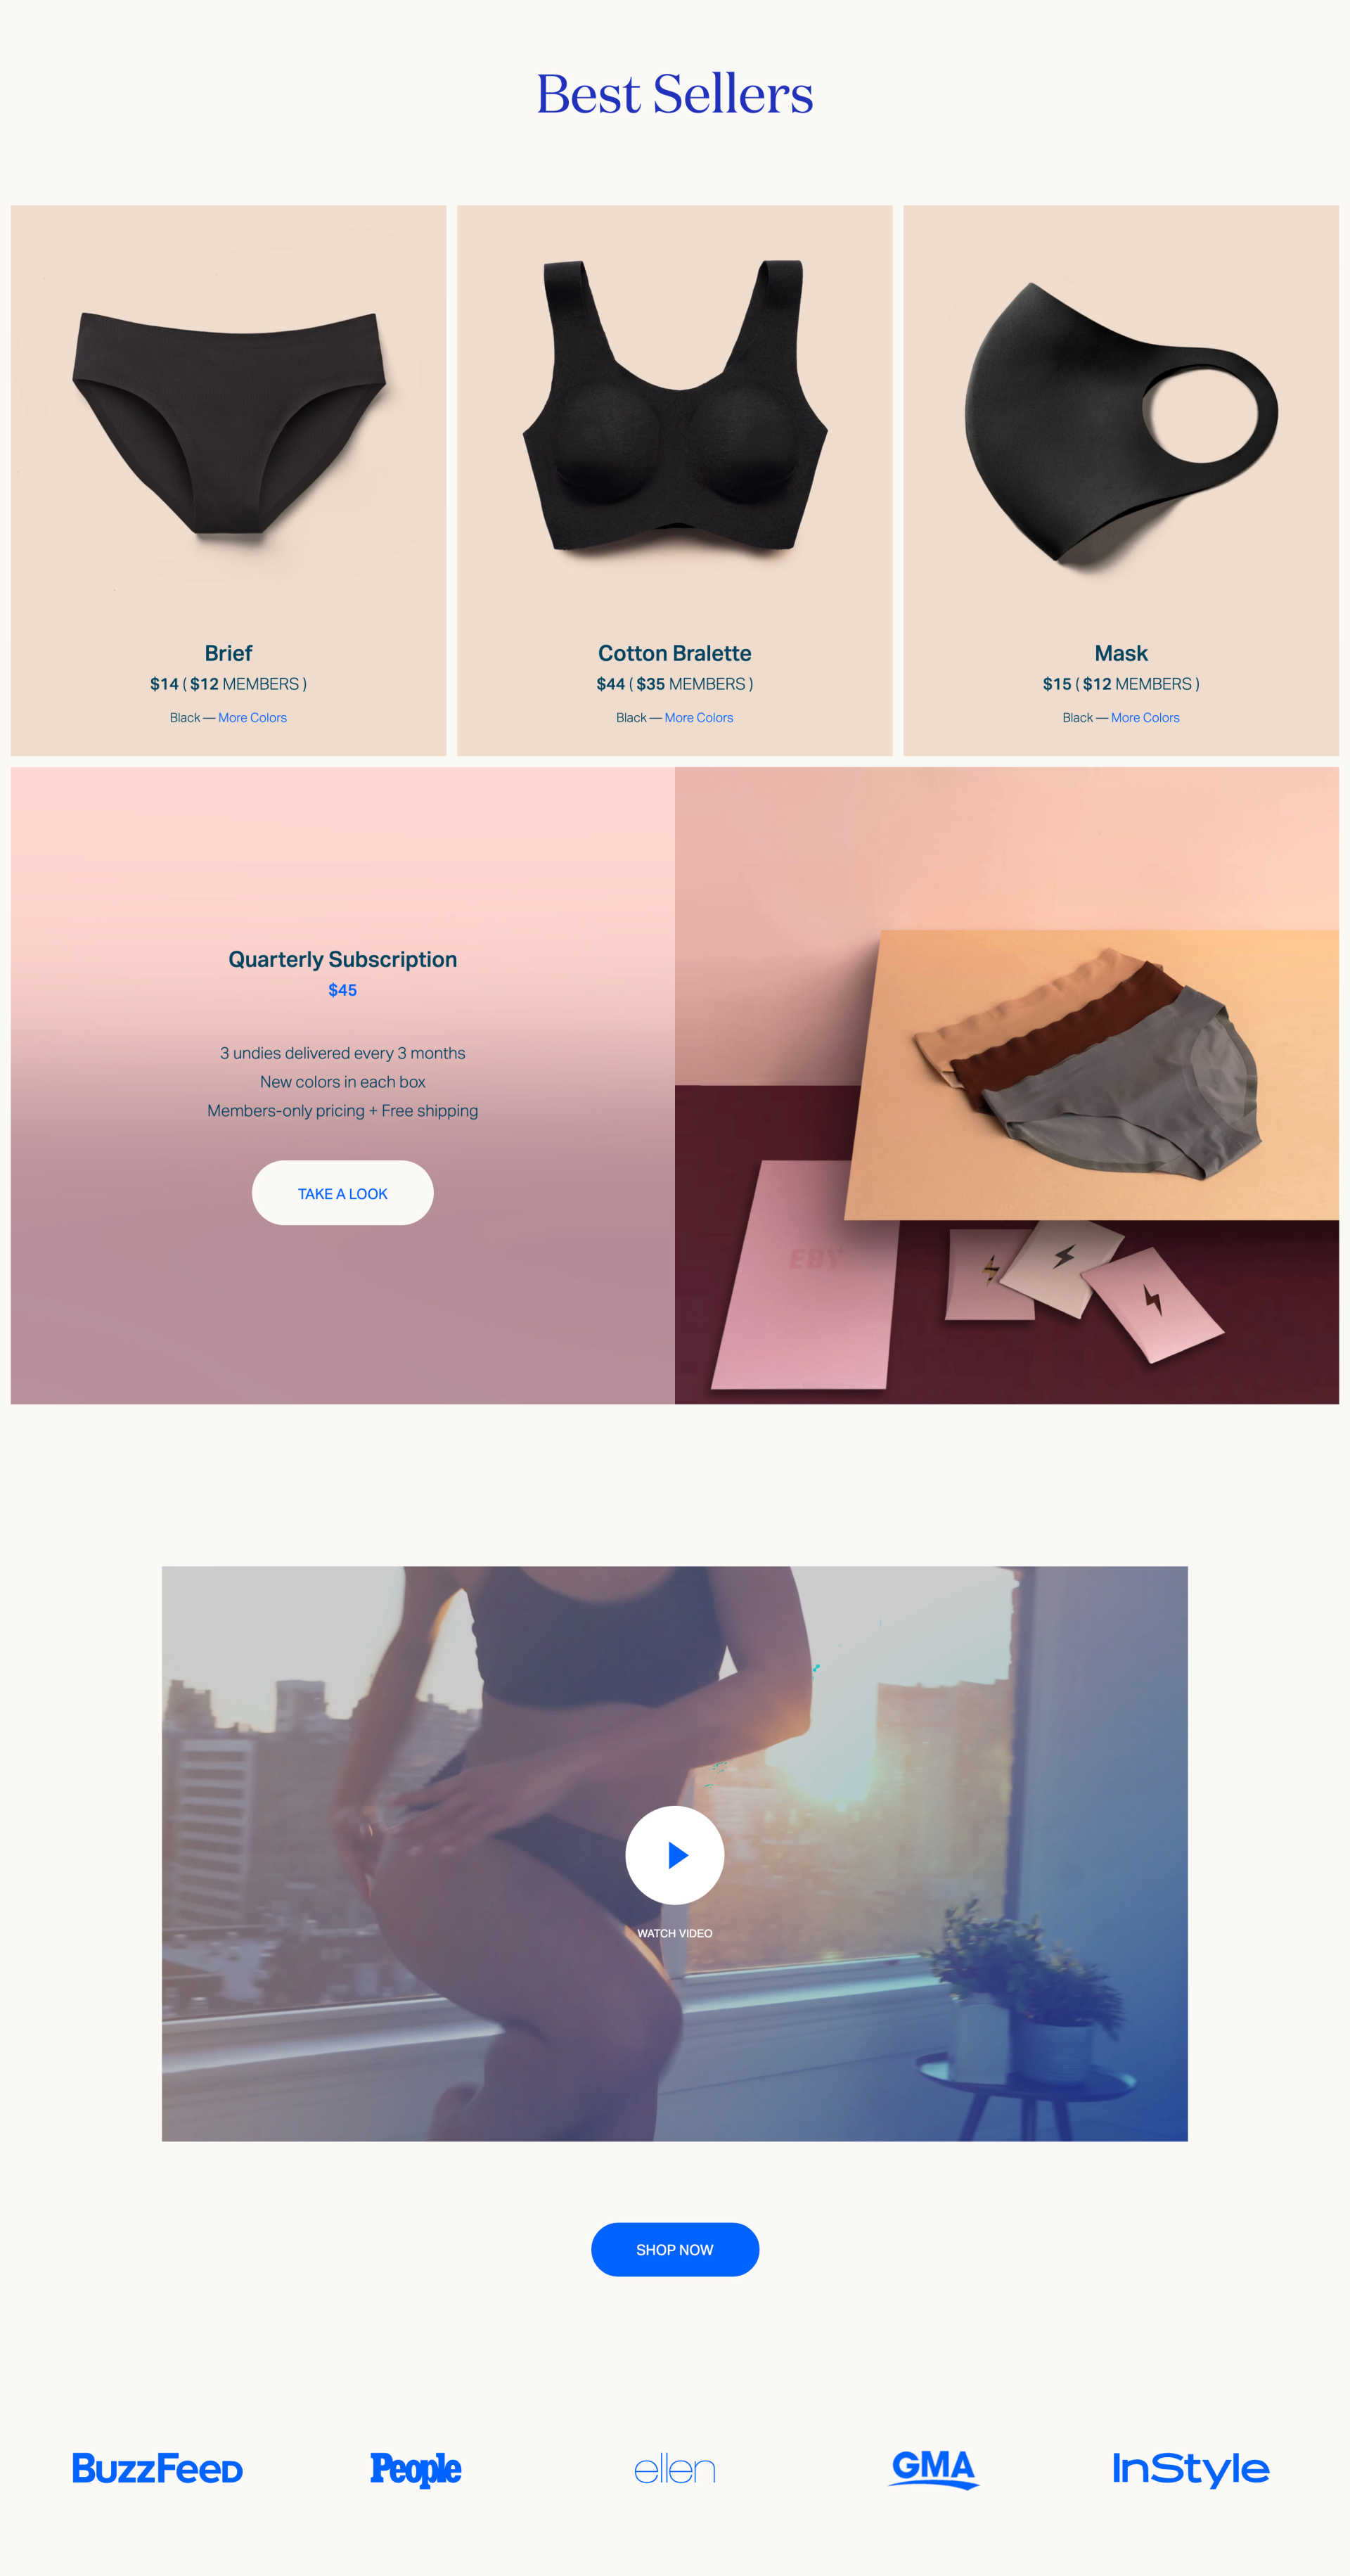 EBY Homepage - Best Sellers, Subscription and Video